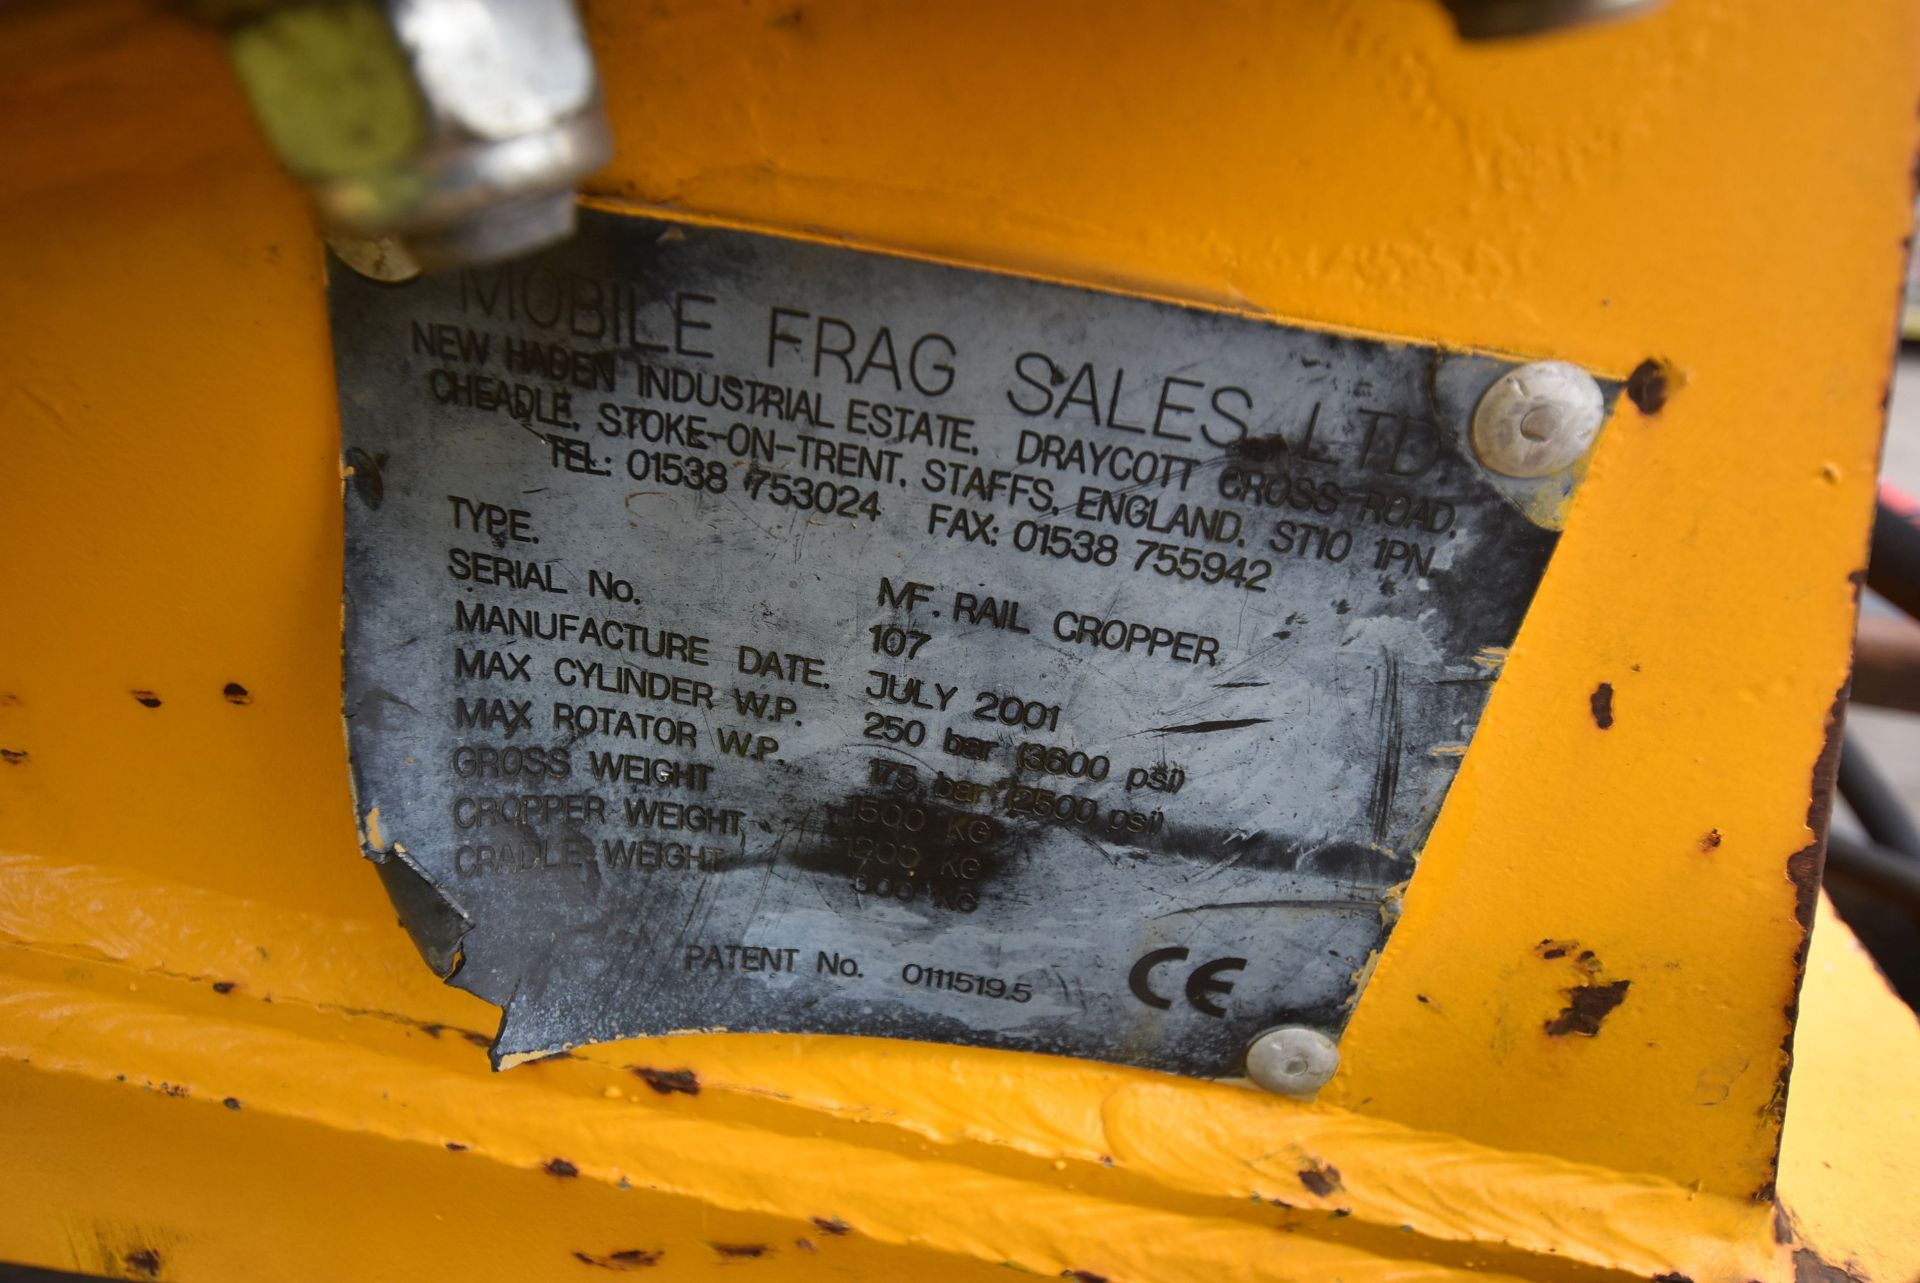 Mobile Frag Sales MF. HYDRAULIC RAIL CROPPER, serial no. 107, year of manufacture 2001, with steel - Image 5 of 12